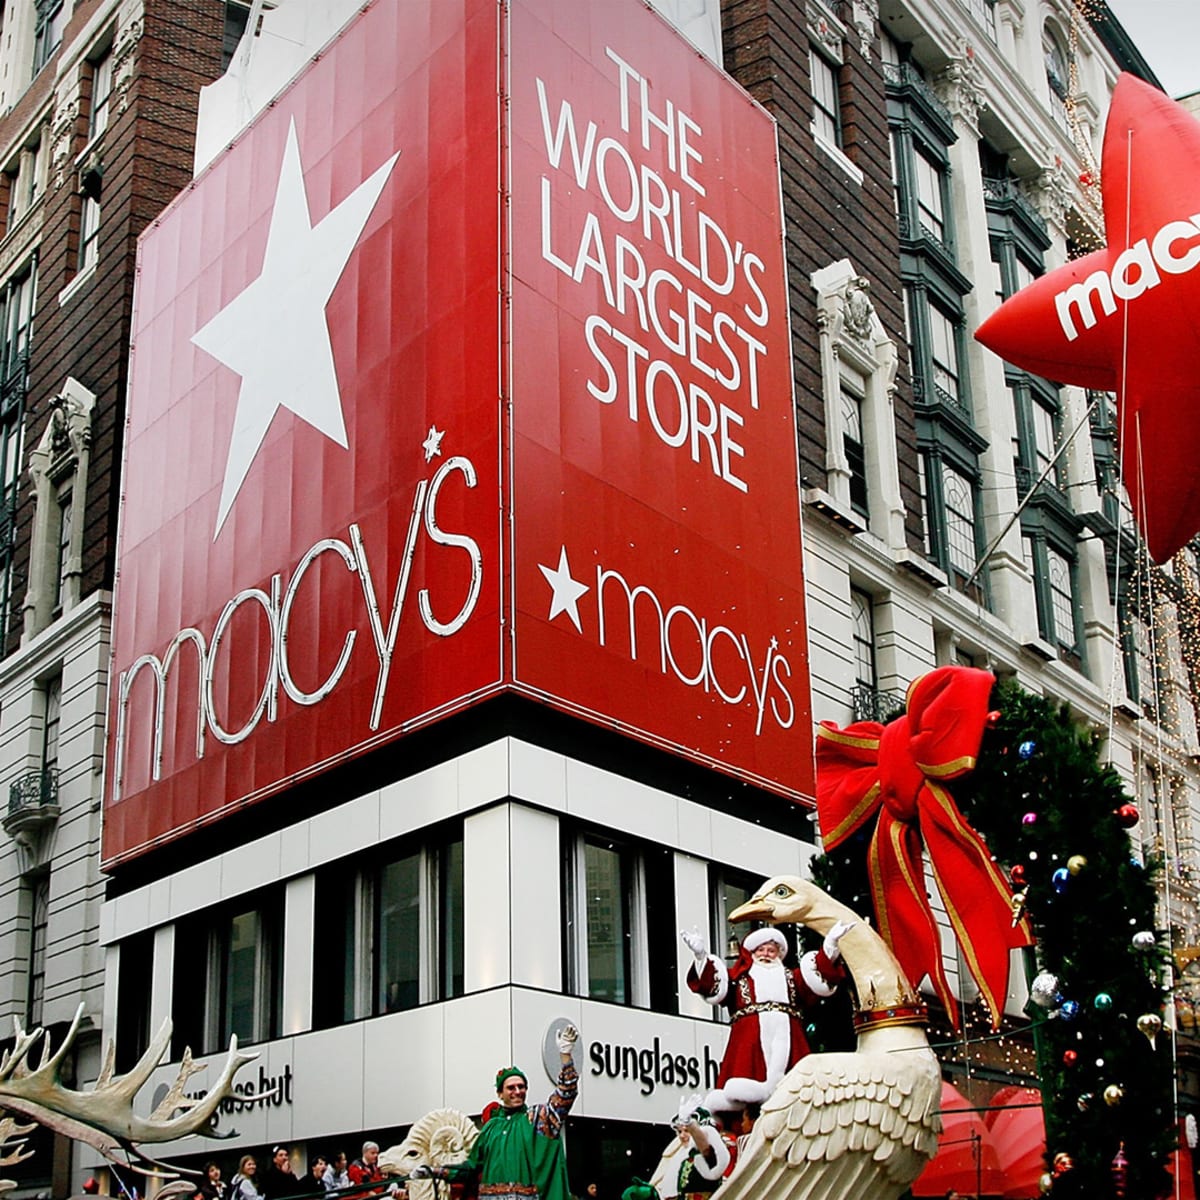 Macy's History: From Small Dry Goods Store to Global Retailer